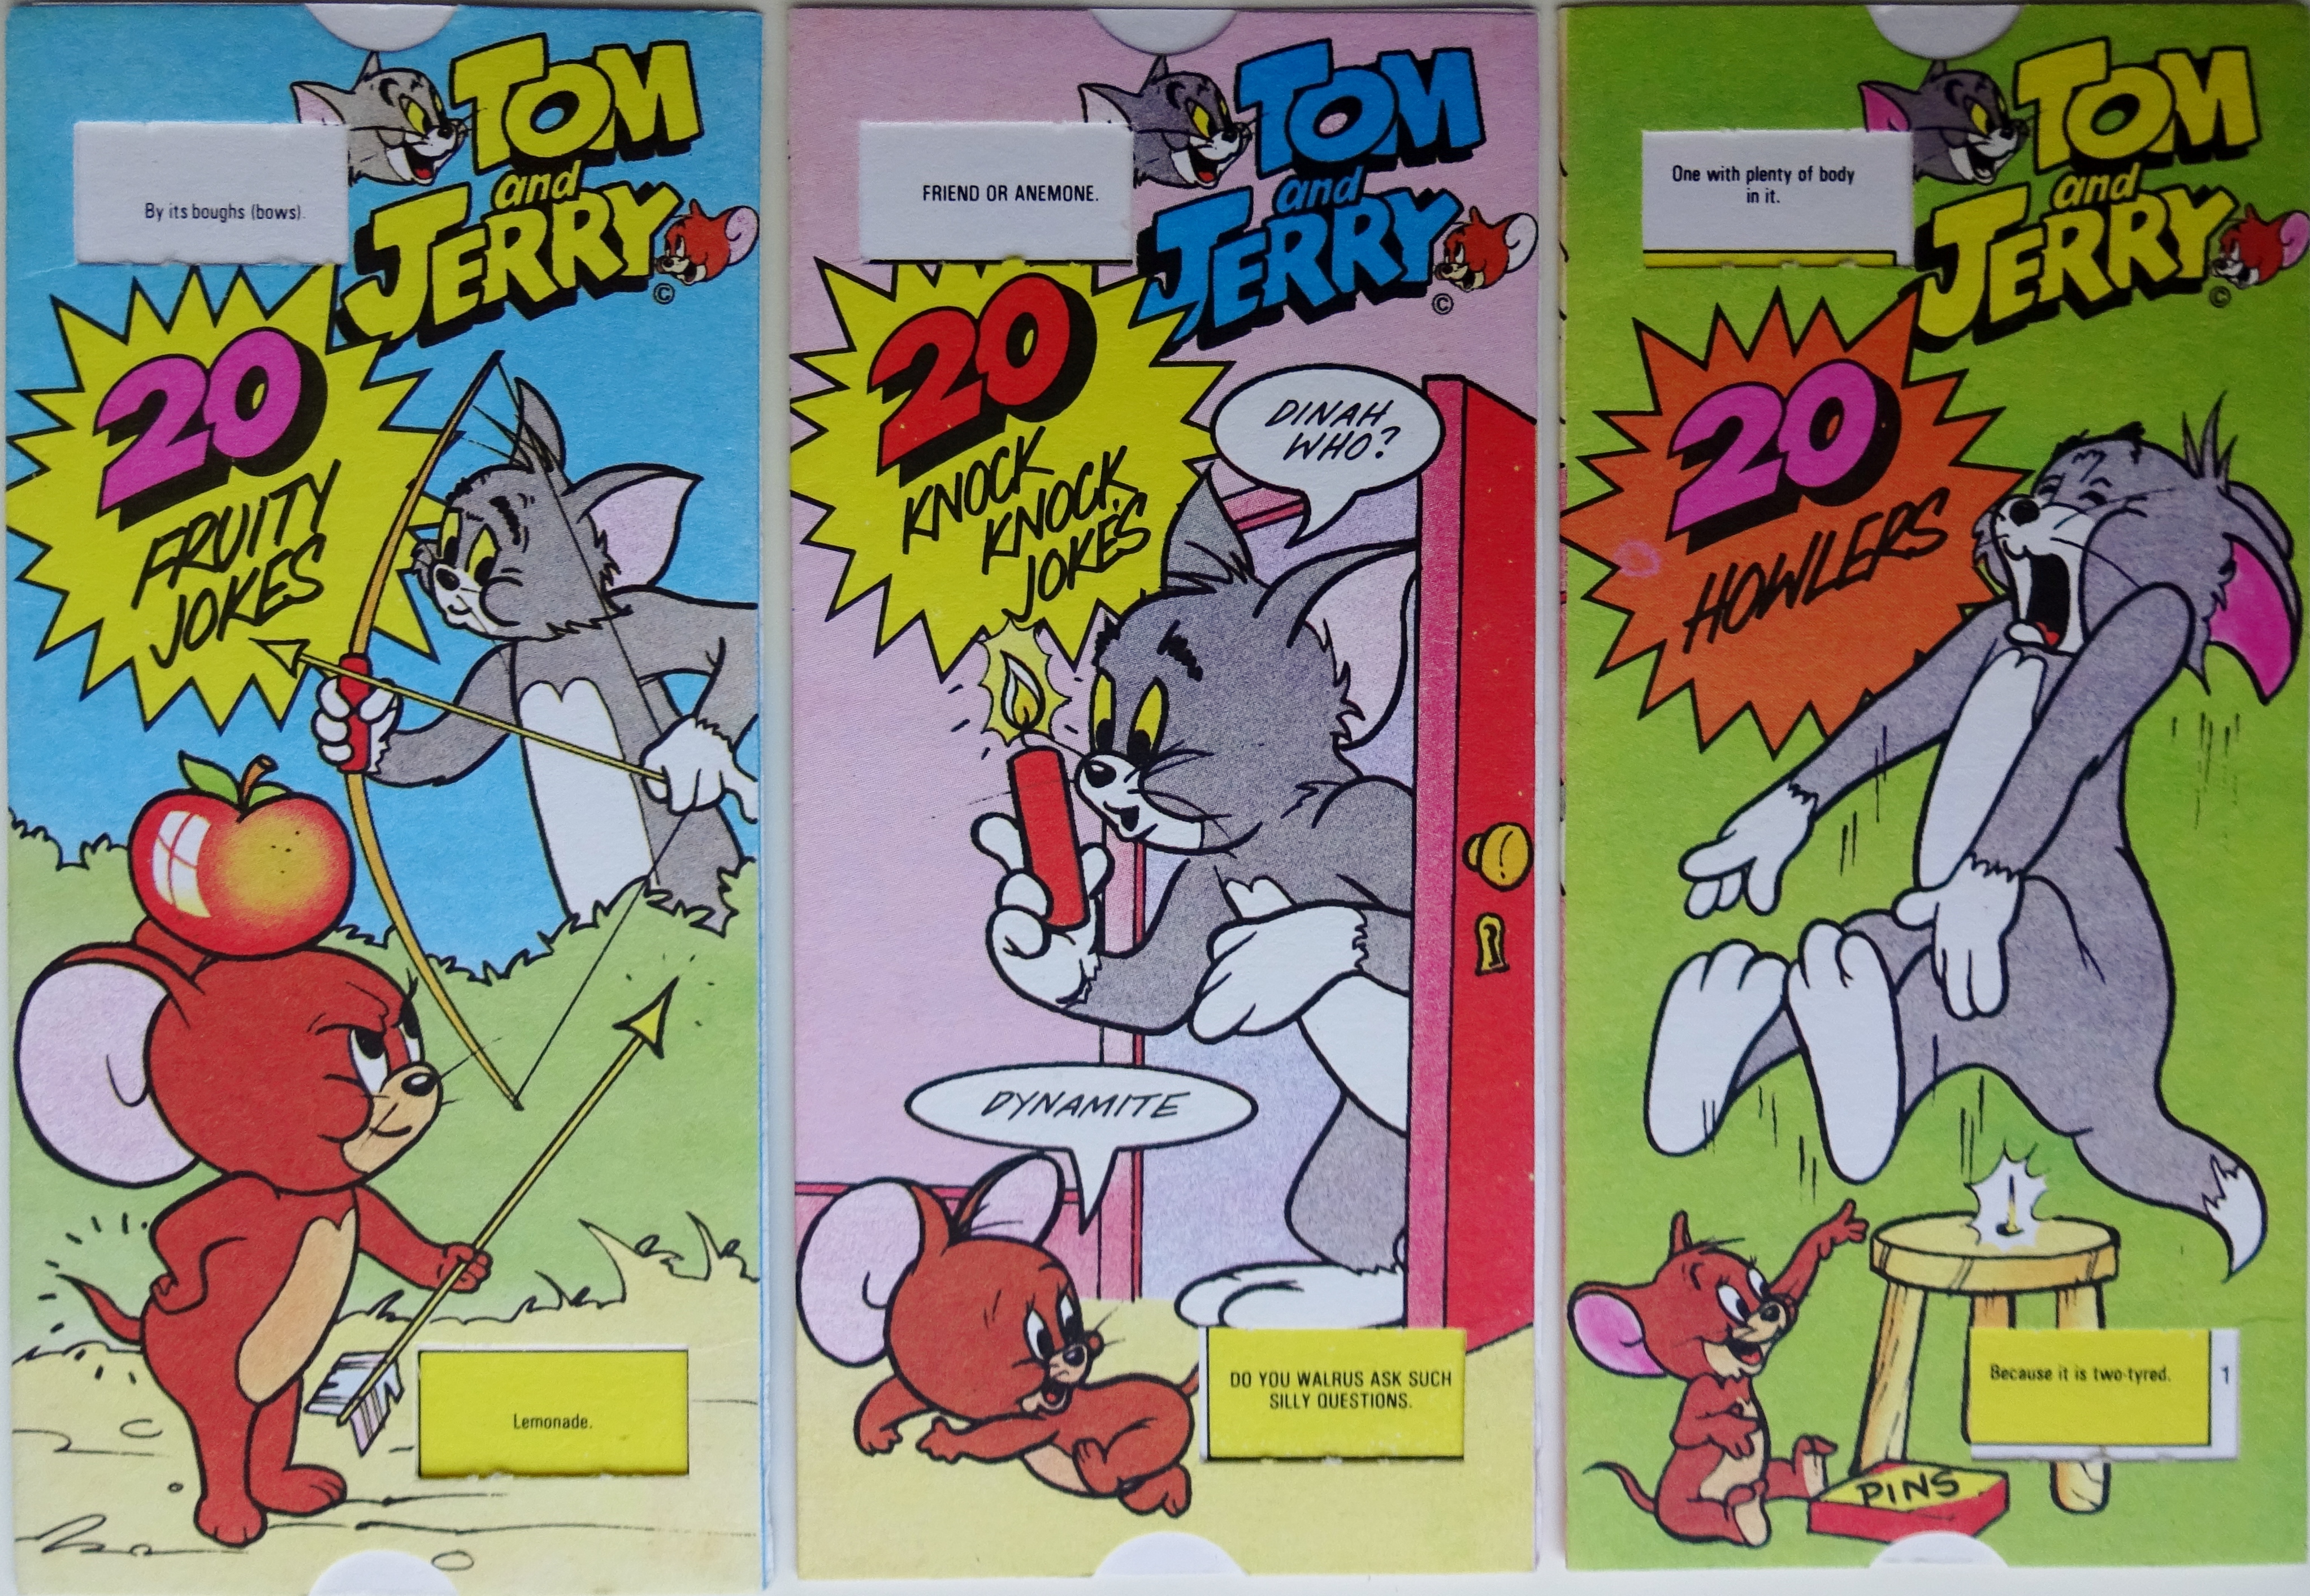 1982 Tom & Jerry Comic Strip issued with Shredded wheat spoonsize Cereal